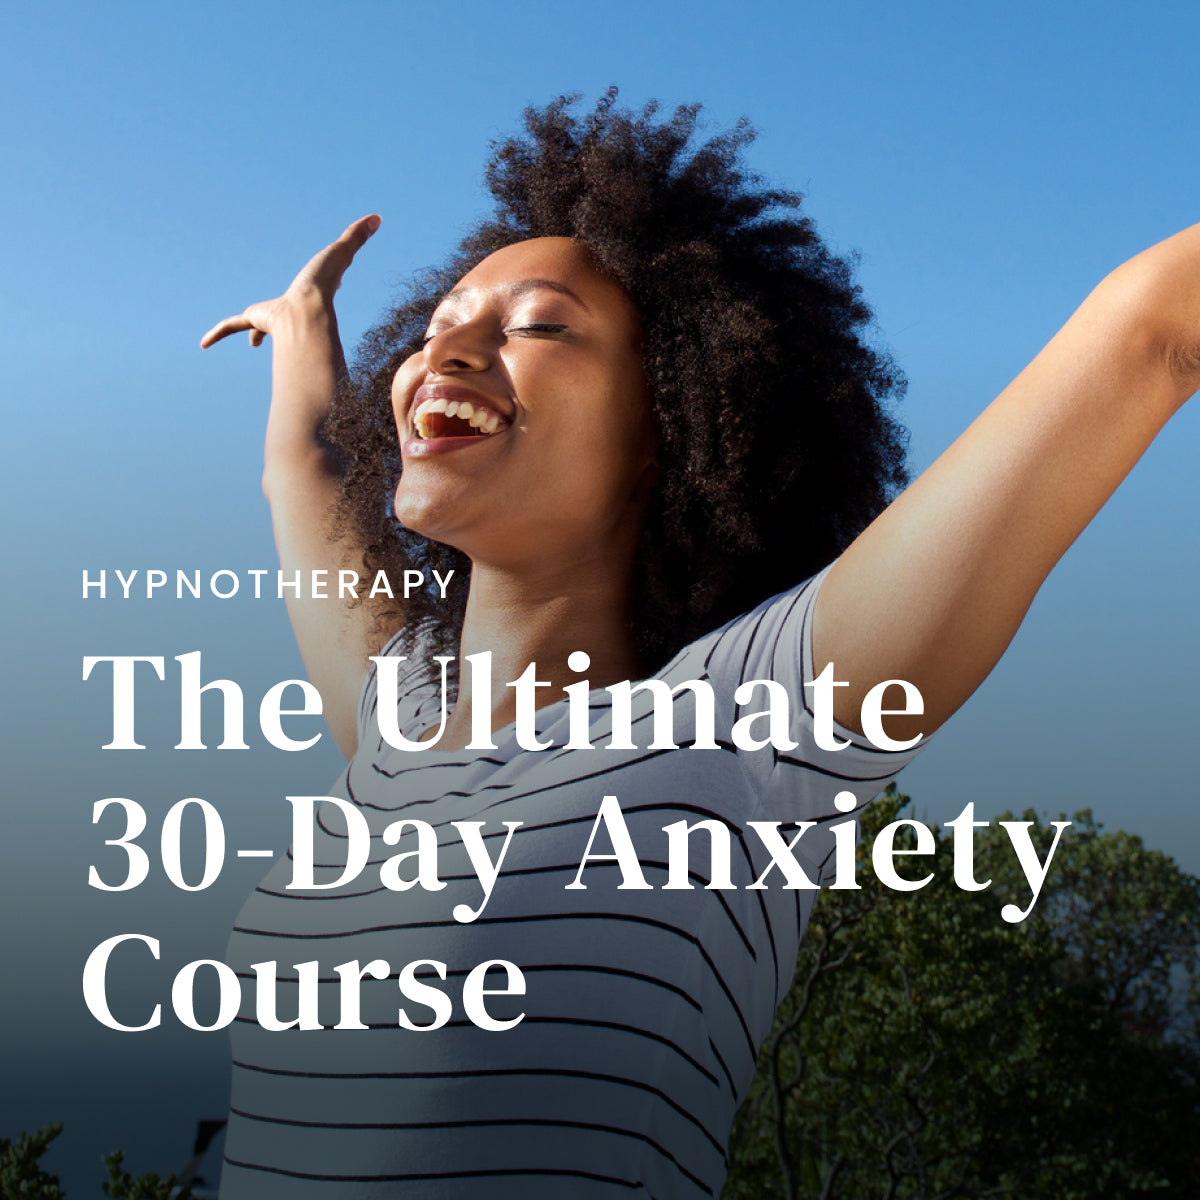 The Ultimate 30-Day Anxiety Course